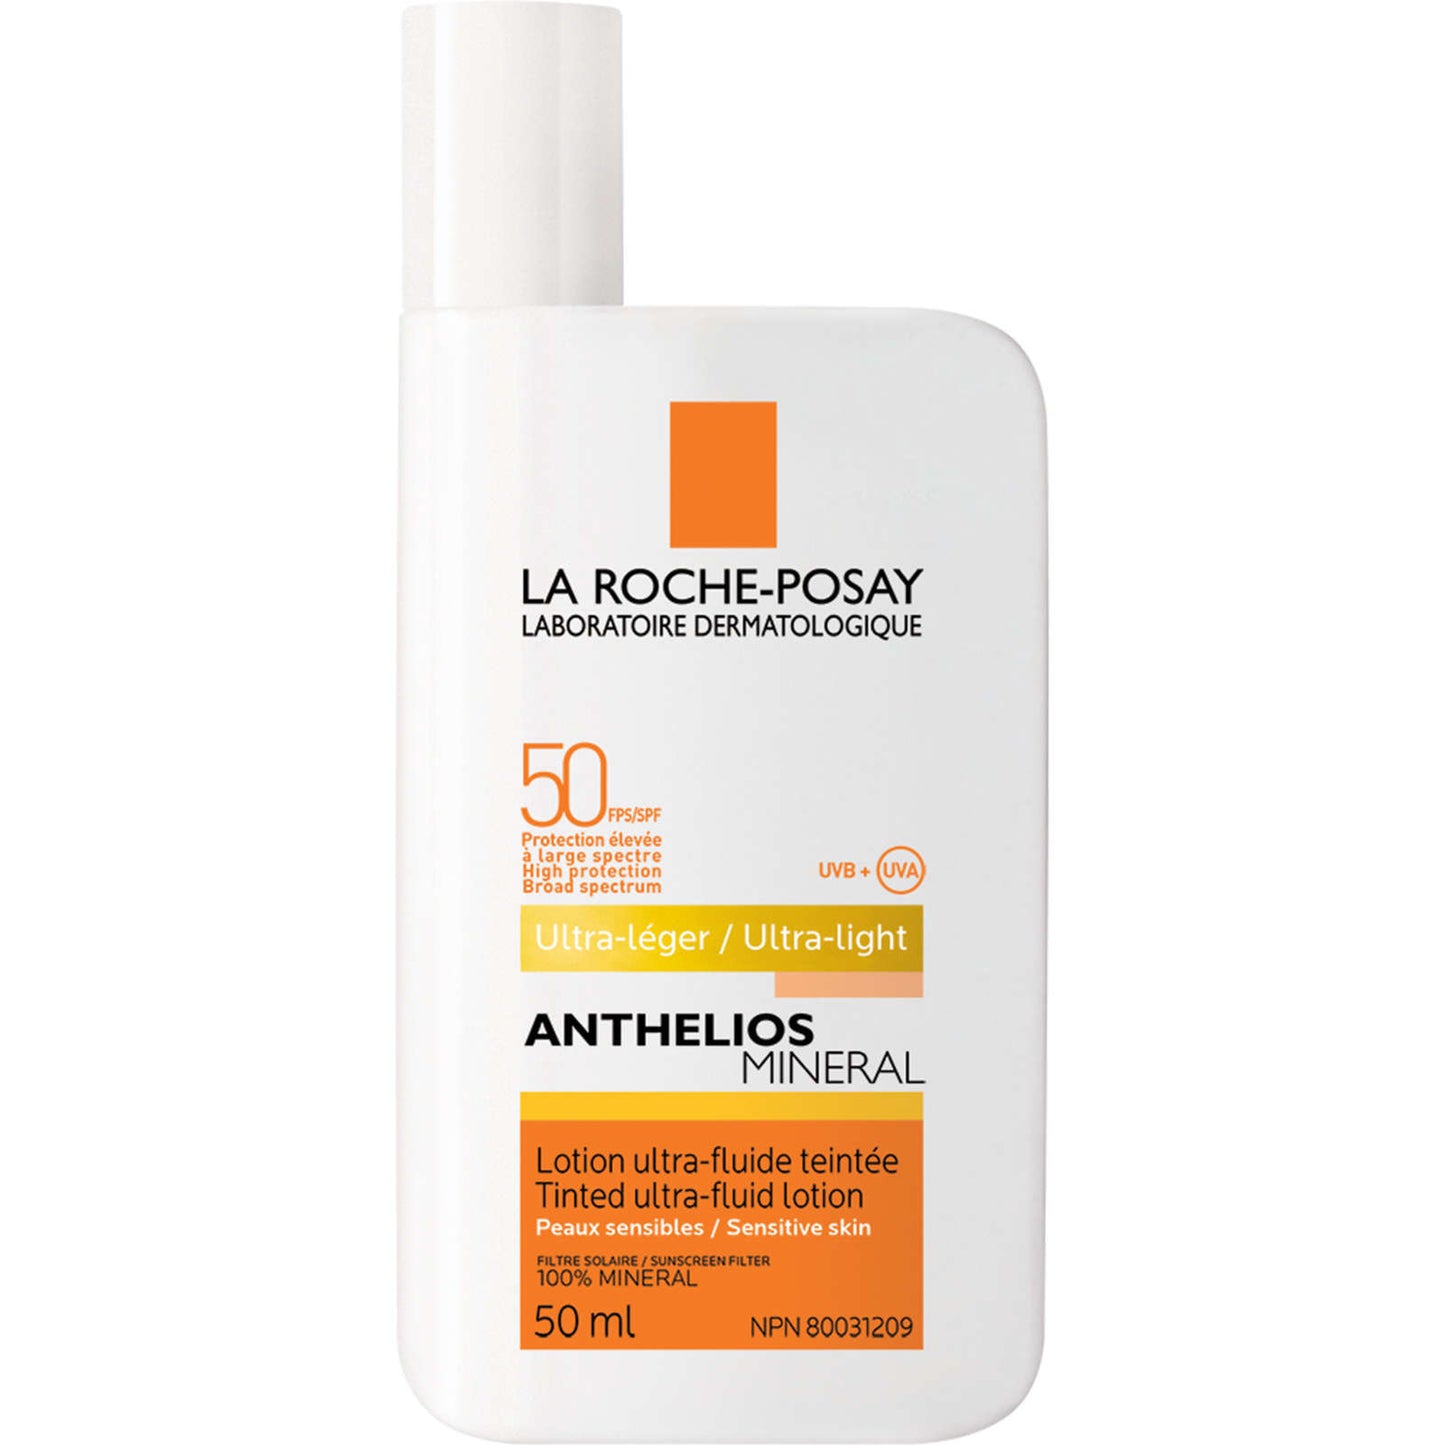 La Roche-Posay Anthelios Mineral Tinted Face Sunscreen Lotion SPF50 50ml NEW